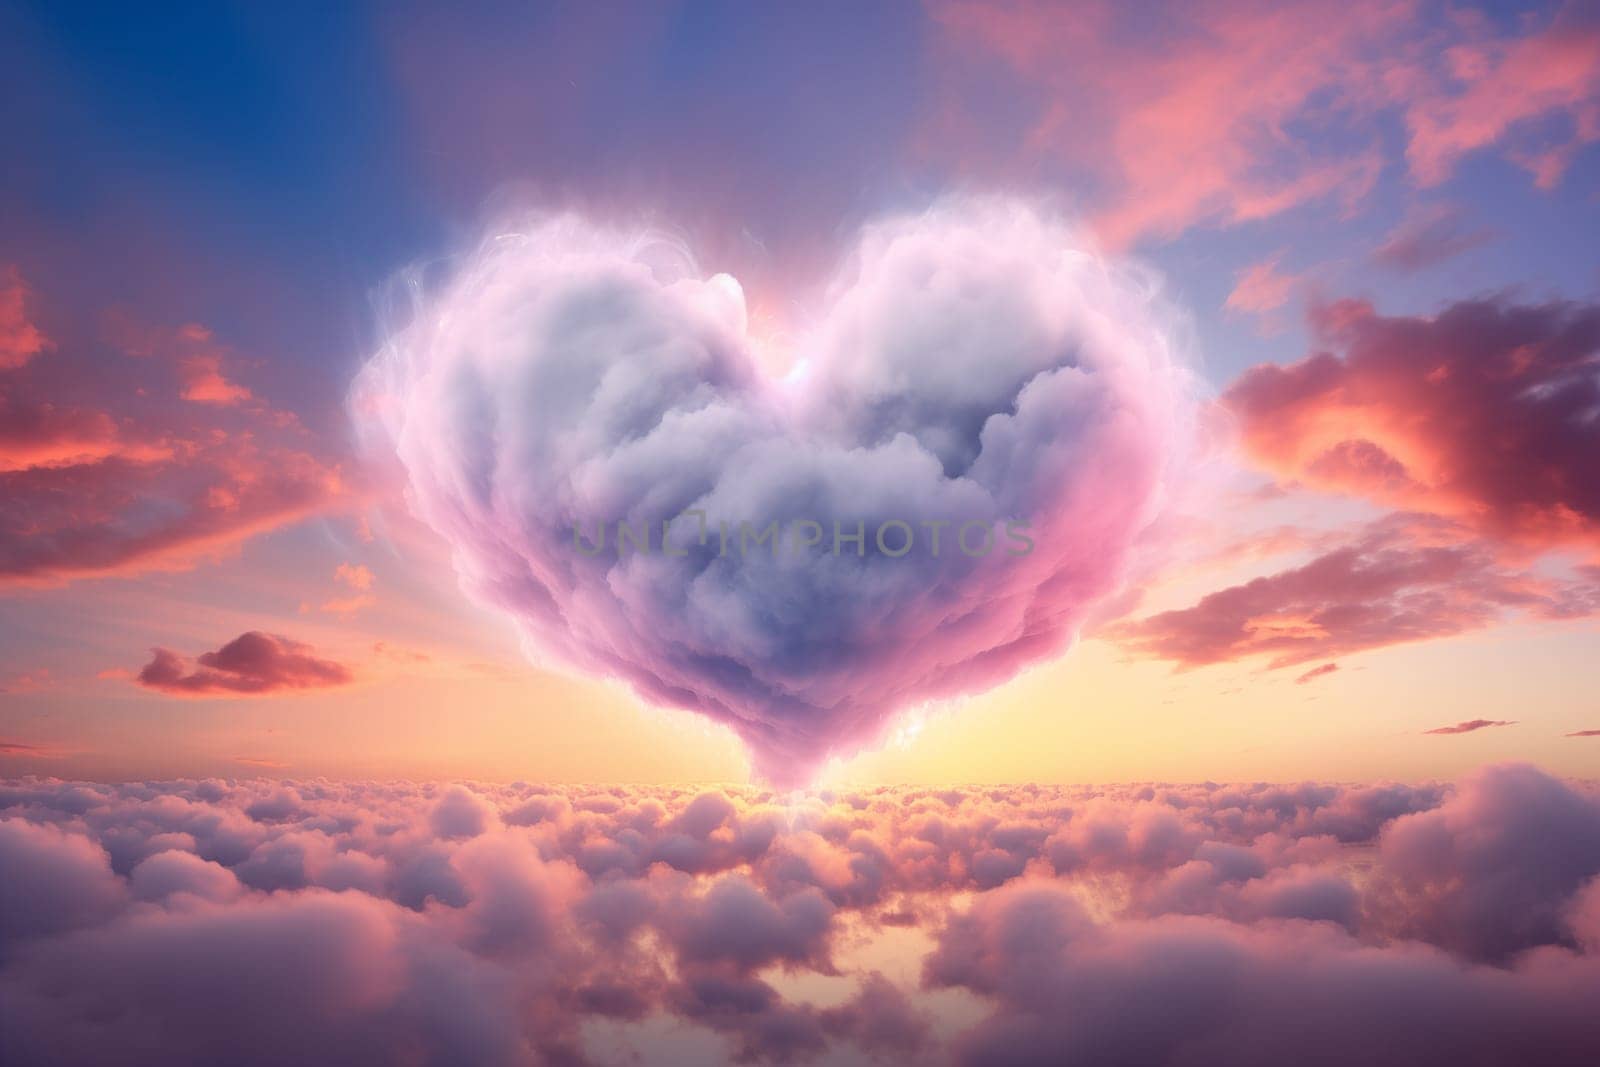 Painting of a heart-shaped cloud illuminated by the warm hues of sunset, floating above a serene sea of clouds. For love, romance, tenderness and Valentine day design